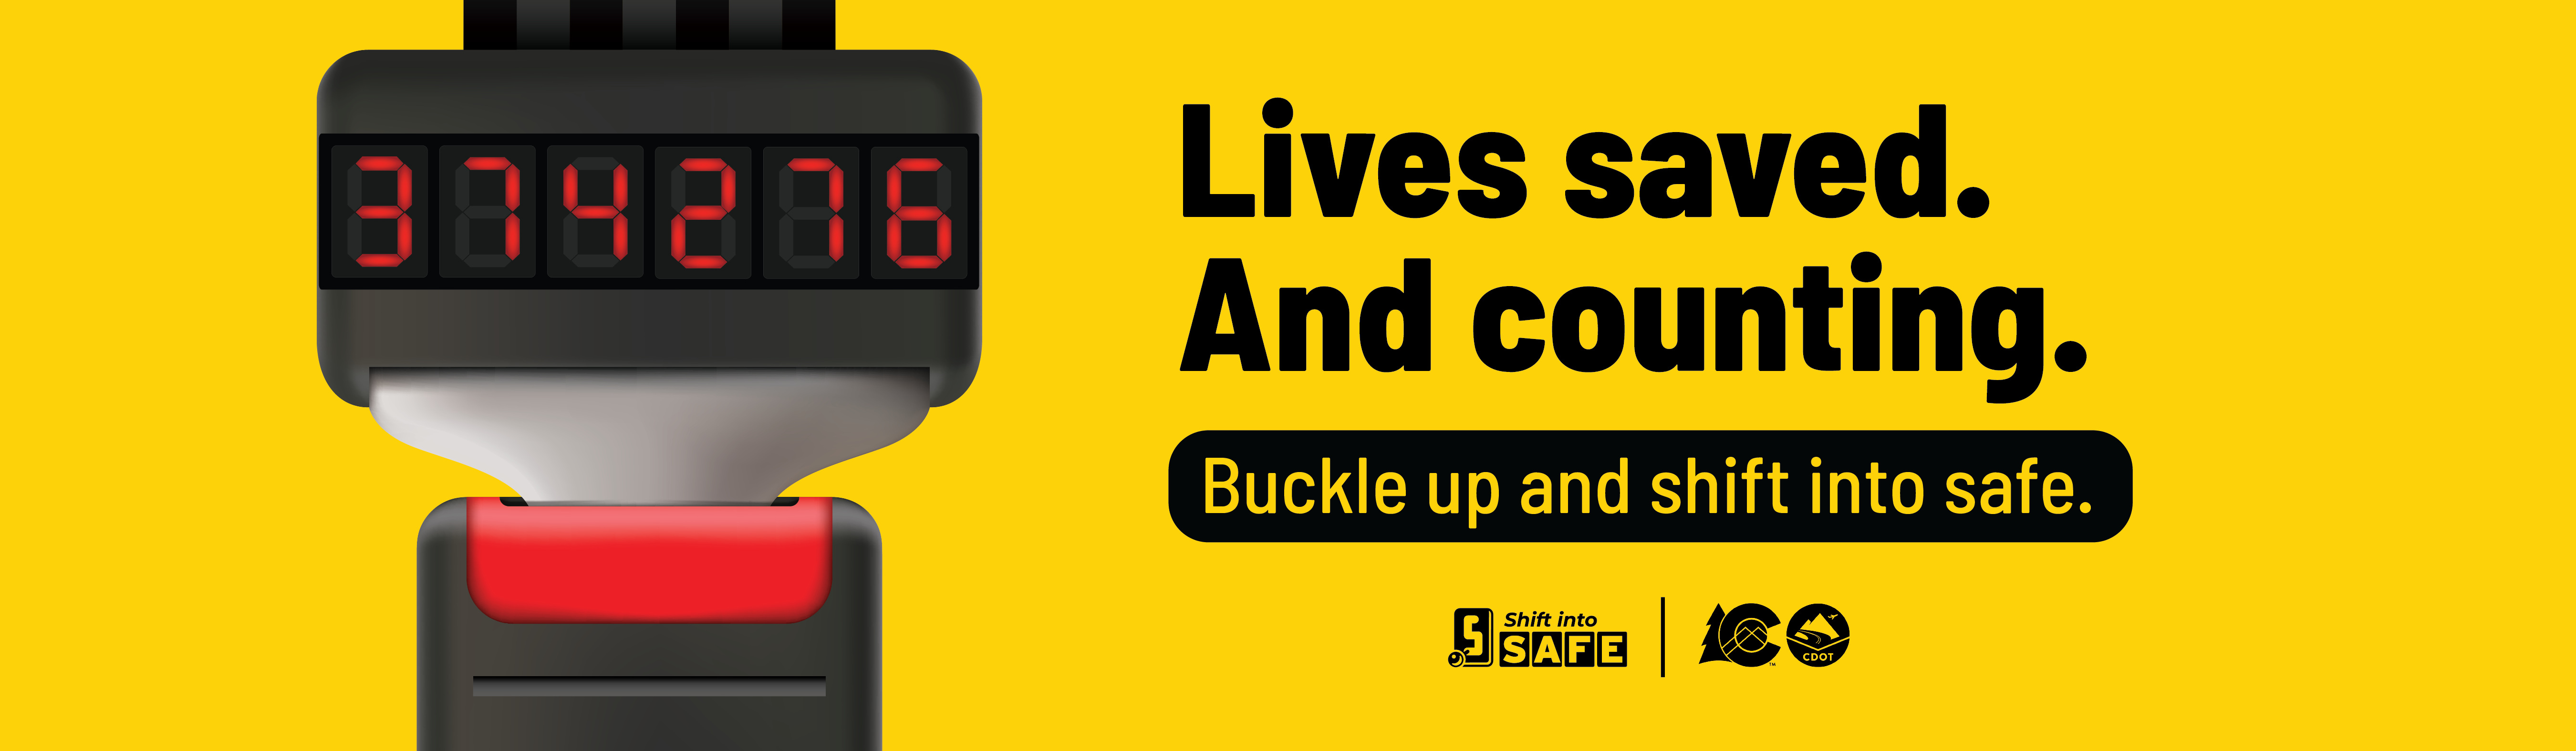 Buckle Up and Shift Into Safe detail image